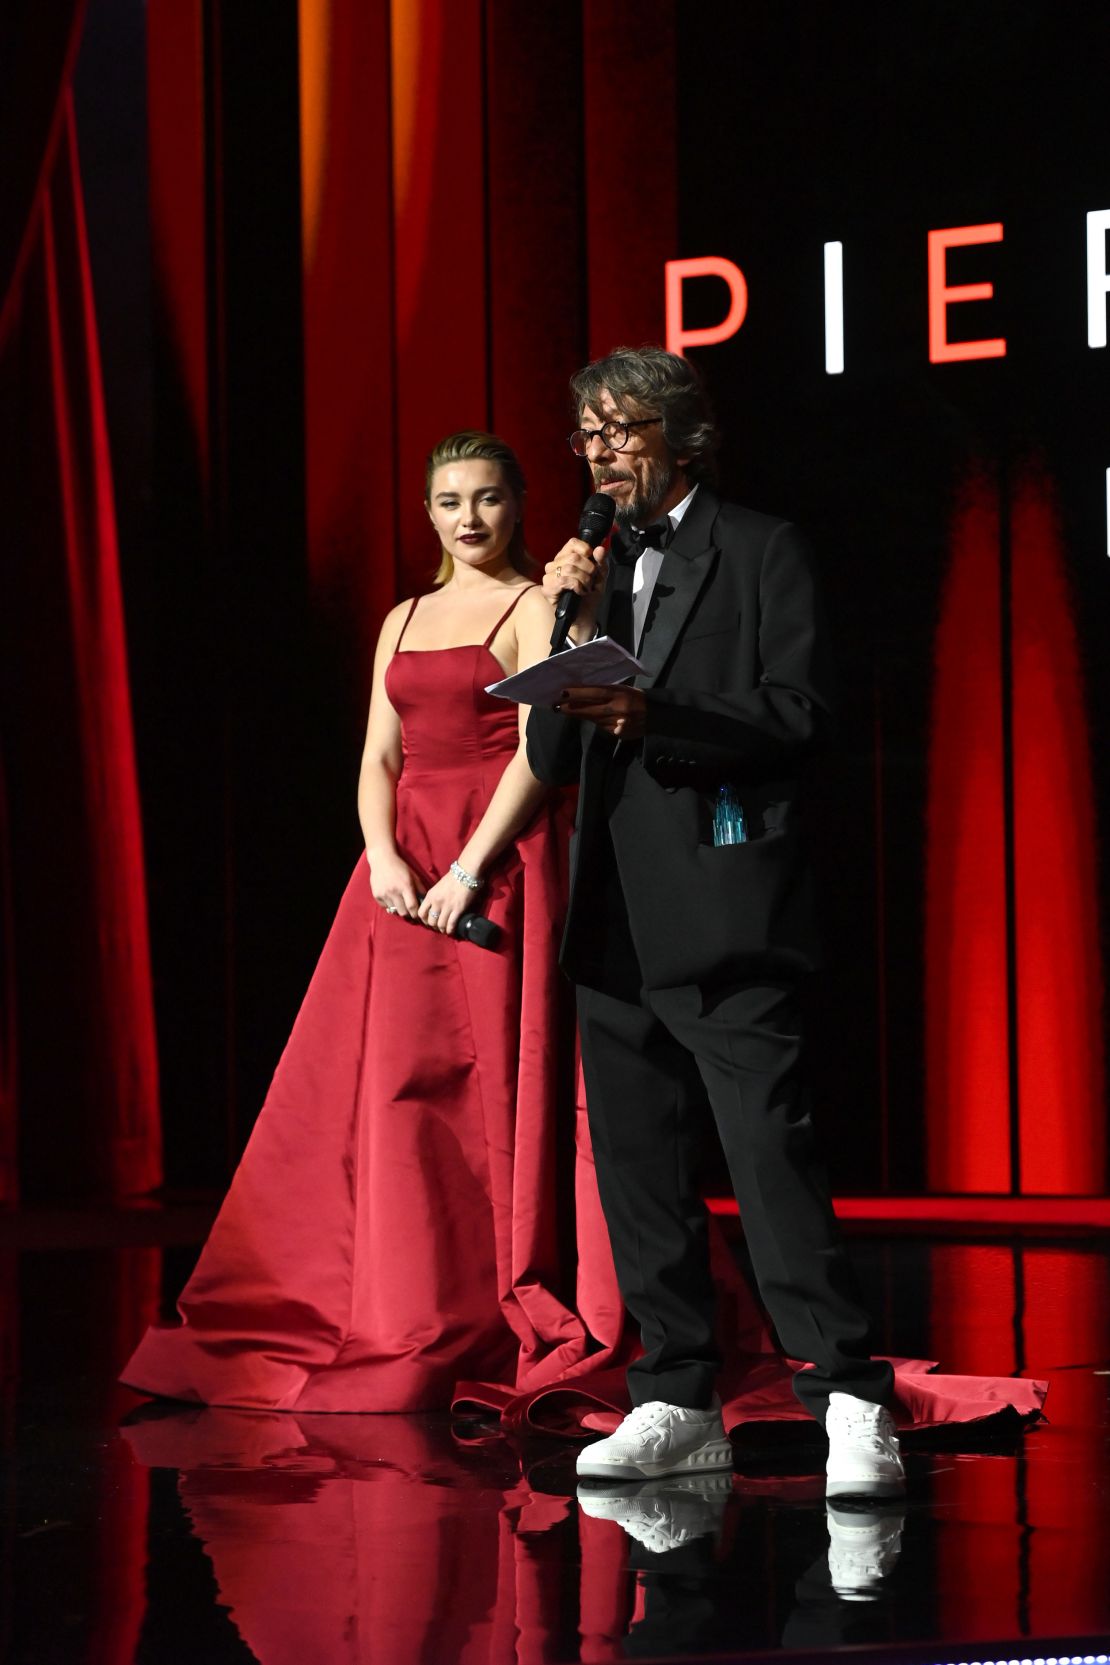 Florence Pugh presented the Designer of the Year award to Pierpaolo Piccioli for Valentino.